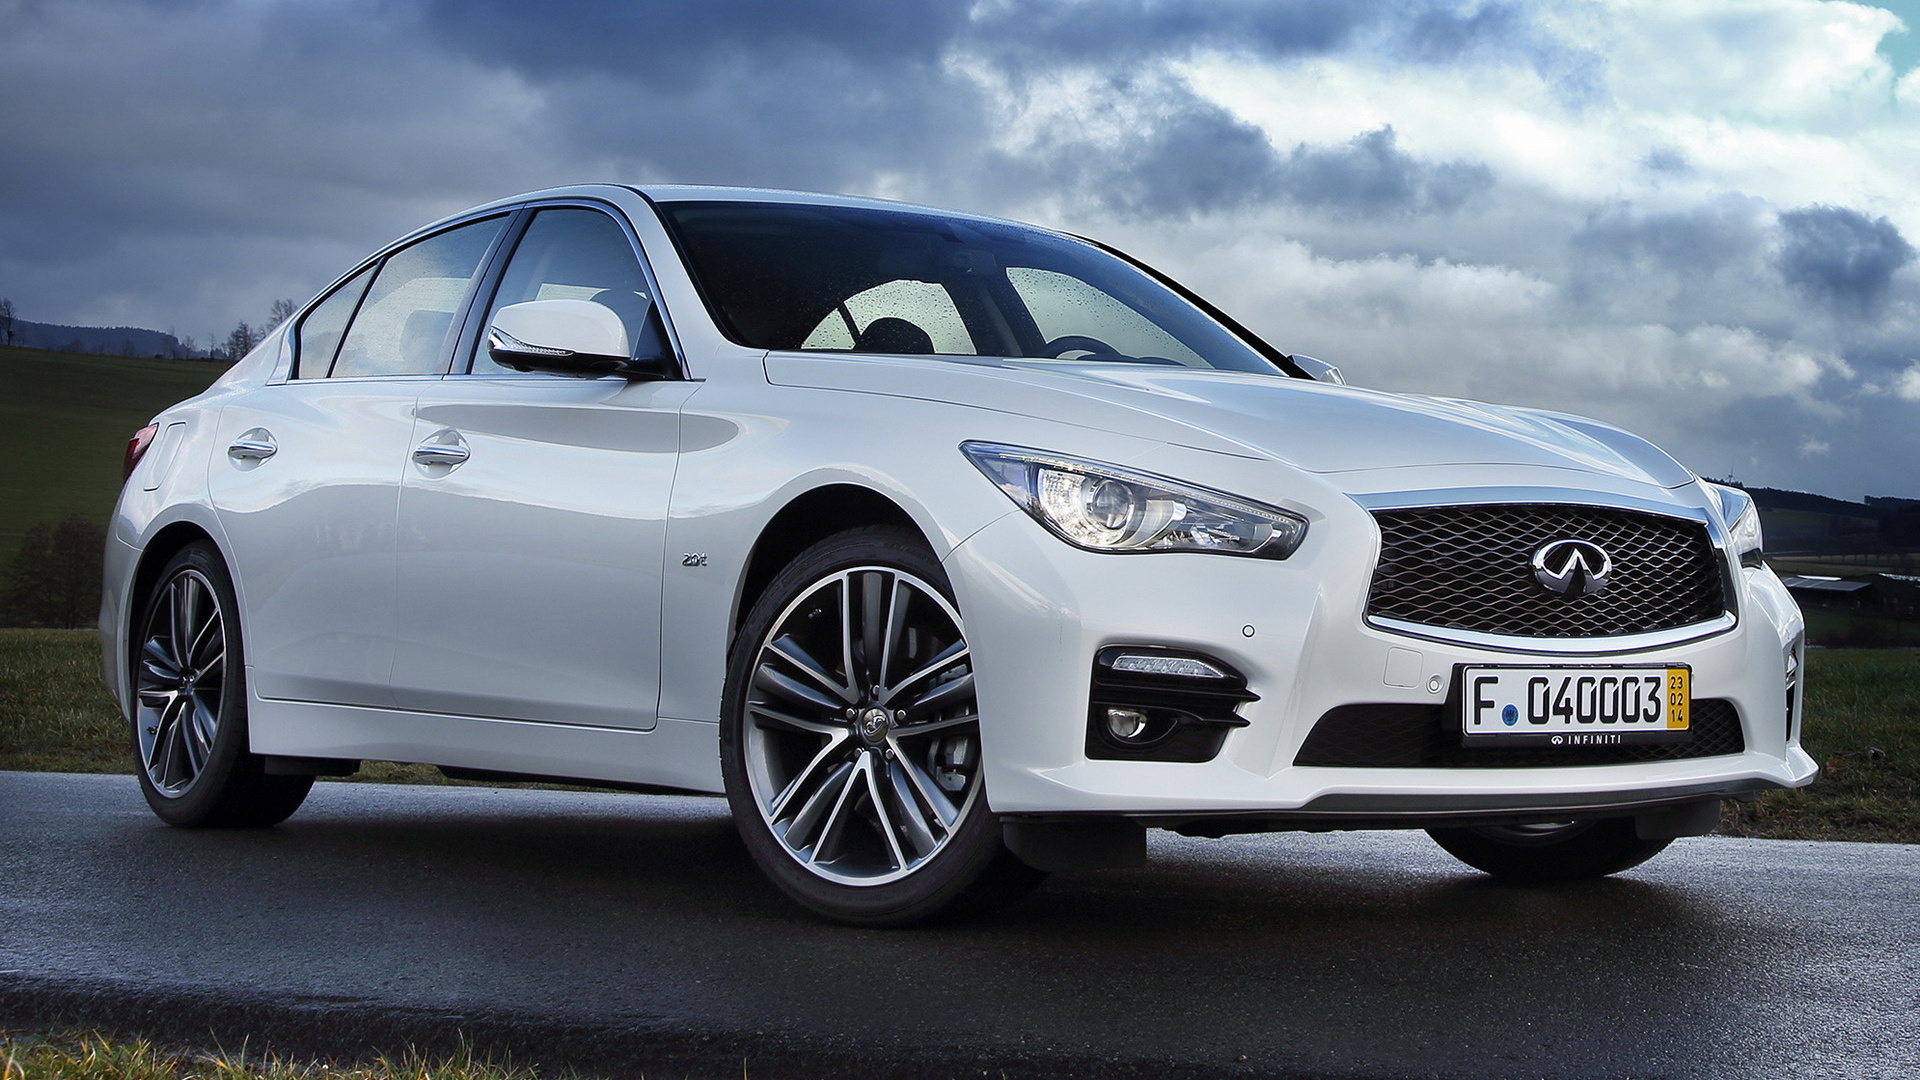 2014 Infiniti Q50 Sport Styling (EU) - Wallpapers and HD Images | Car Pixel